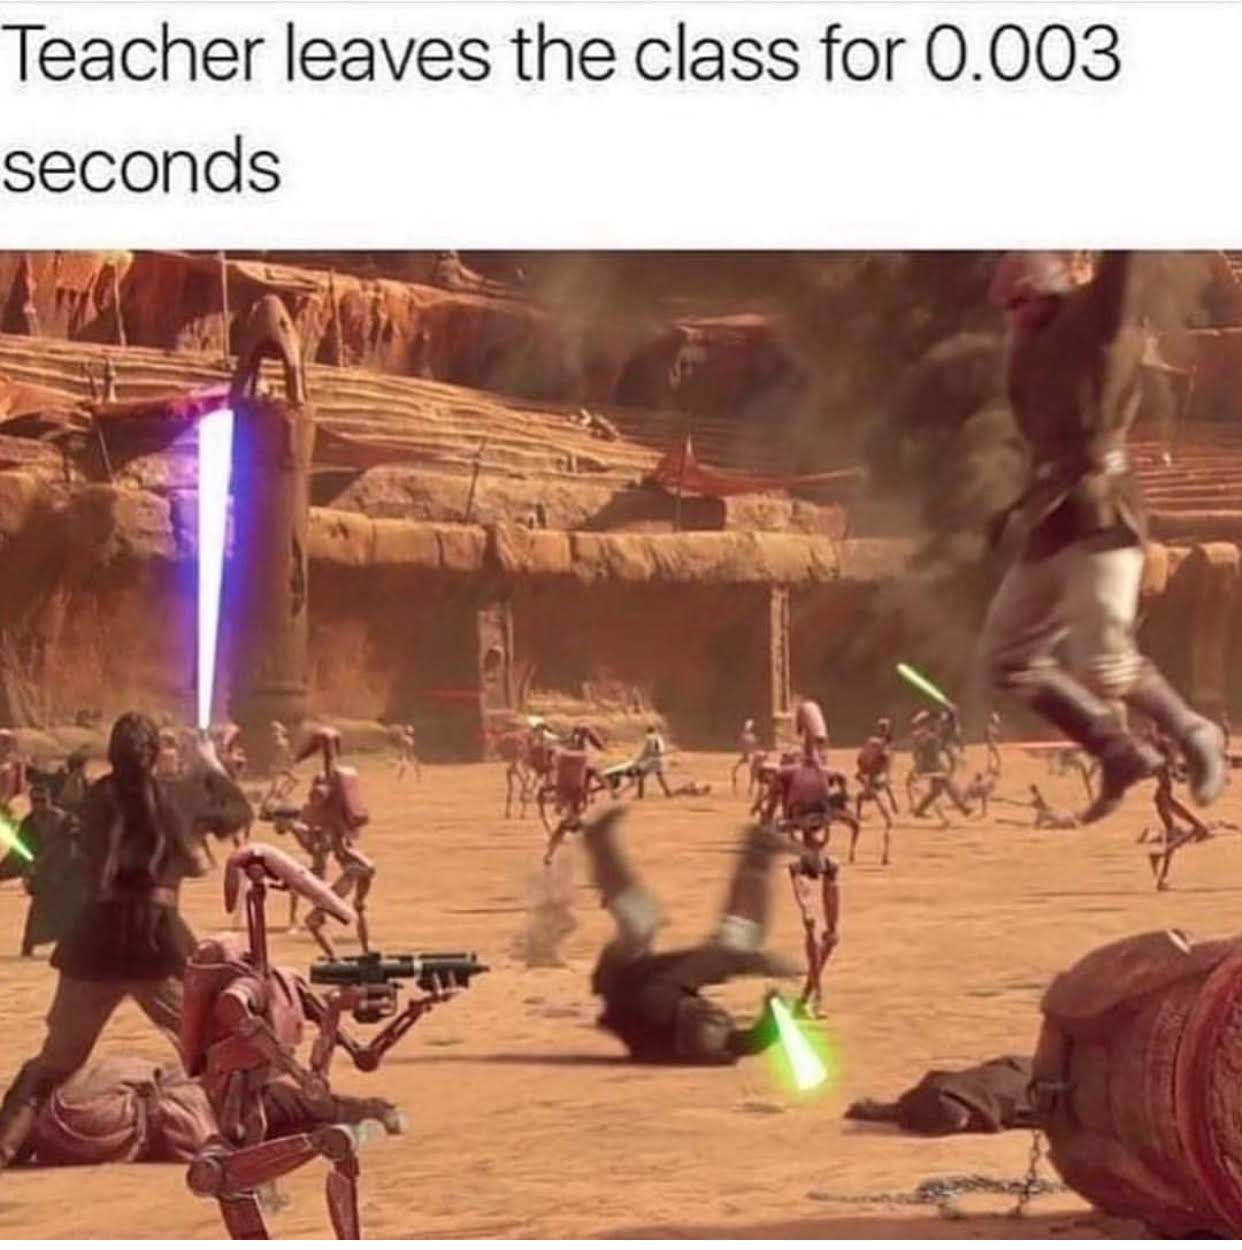 memes - teacher leaves the class for 0.003 seconds - Teacher leaves the class for 0.003 seconds